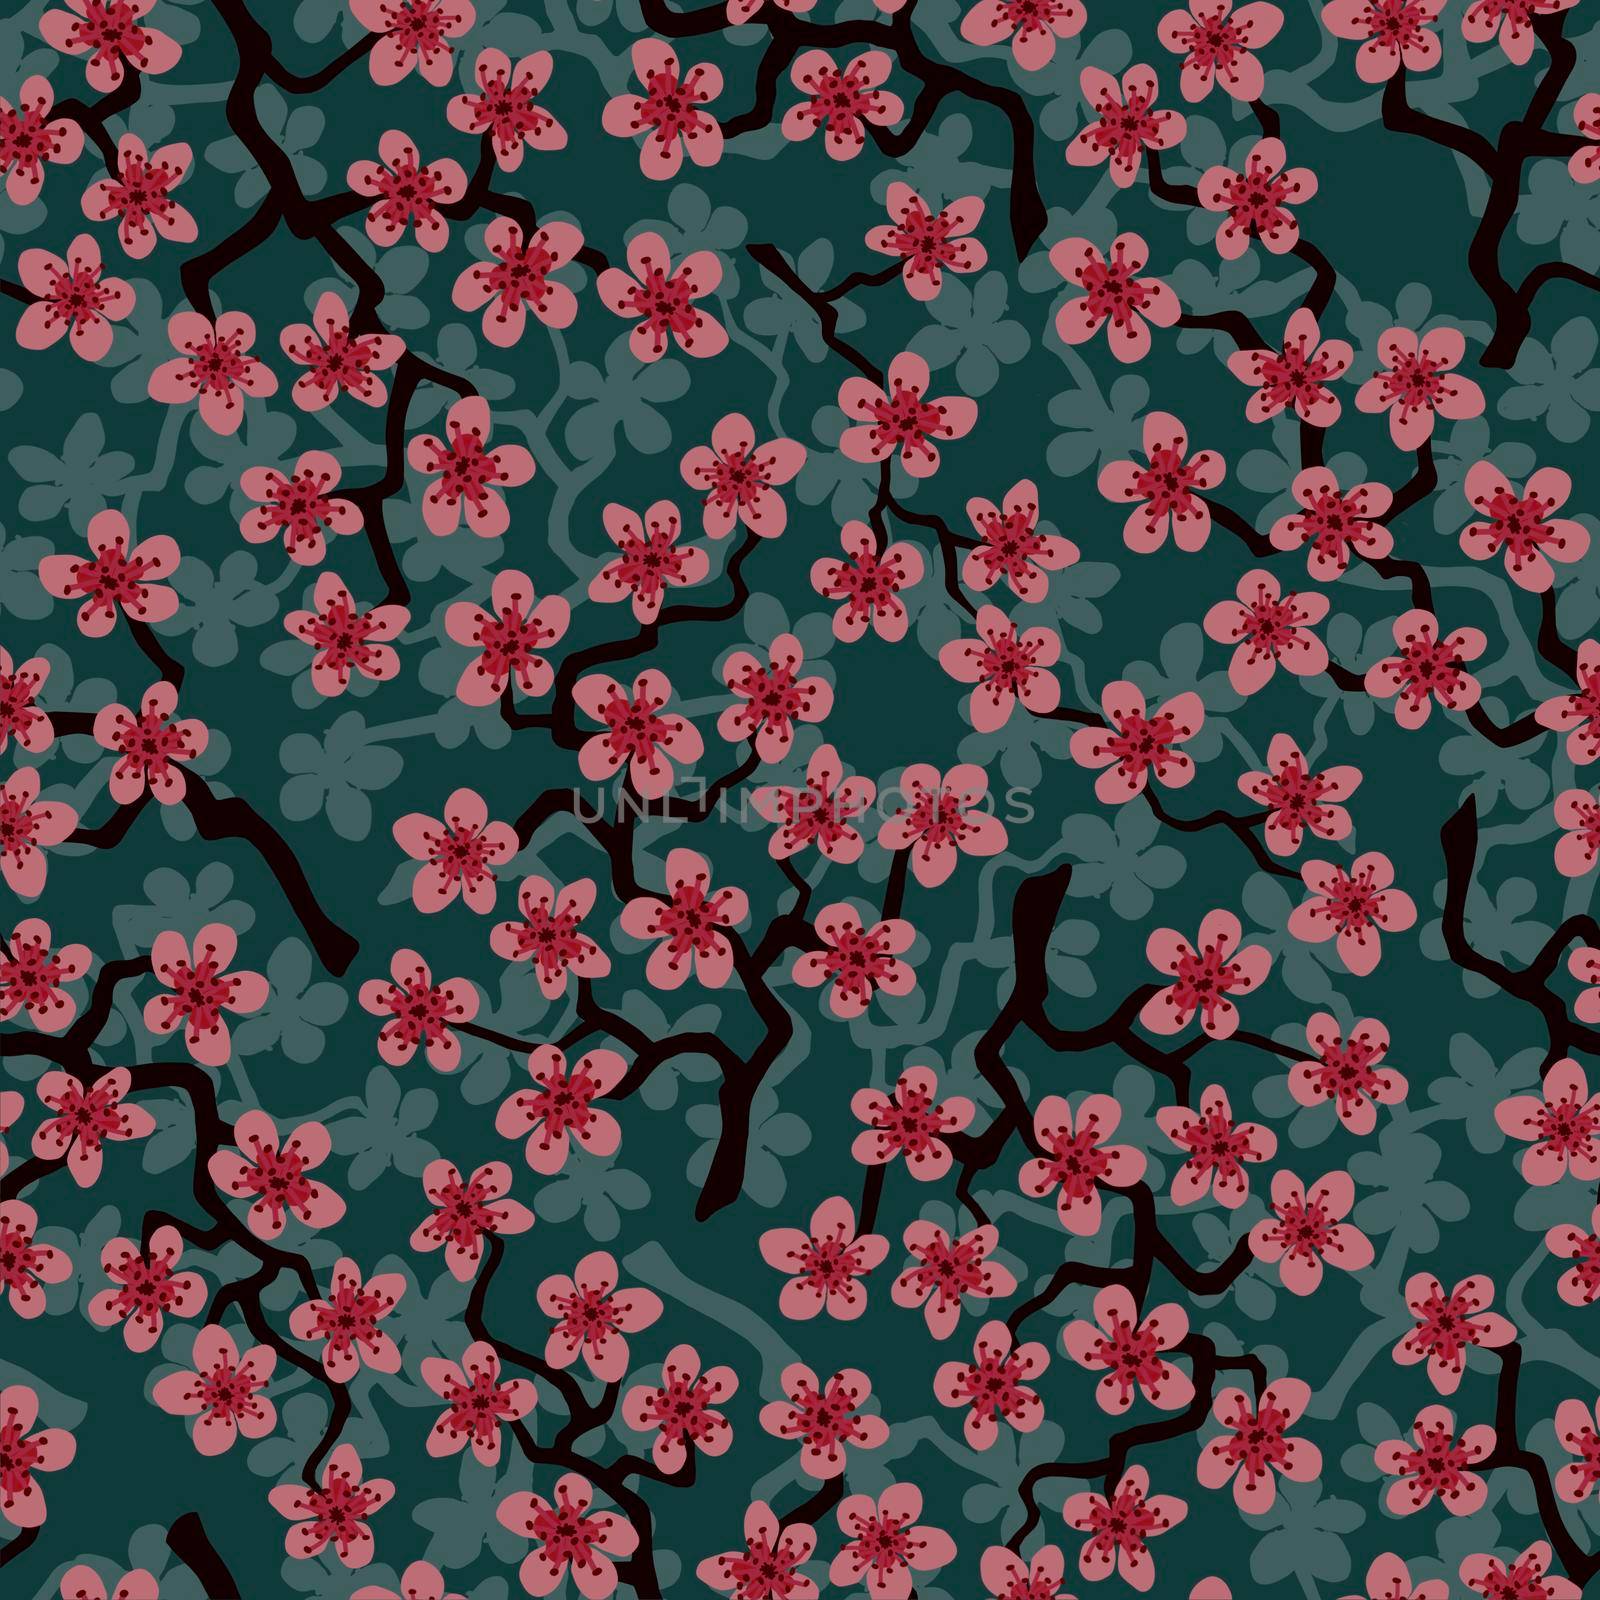 Seamless pattern with blossoming Japanese cherry sakura branches for fabric,packaging,wallpaper,textile decor,design, invitations,print,gift wrap,manufacturing.Pink flowers on olive background. by Angelsmoon